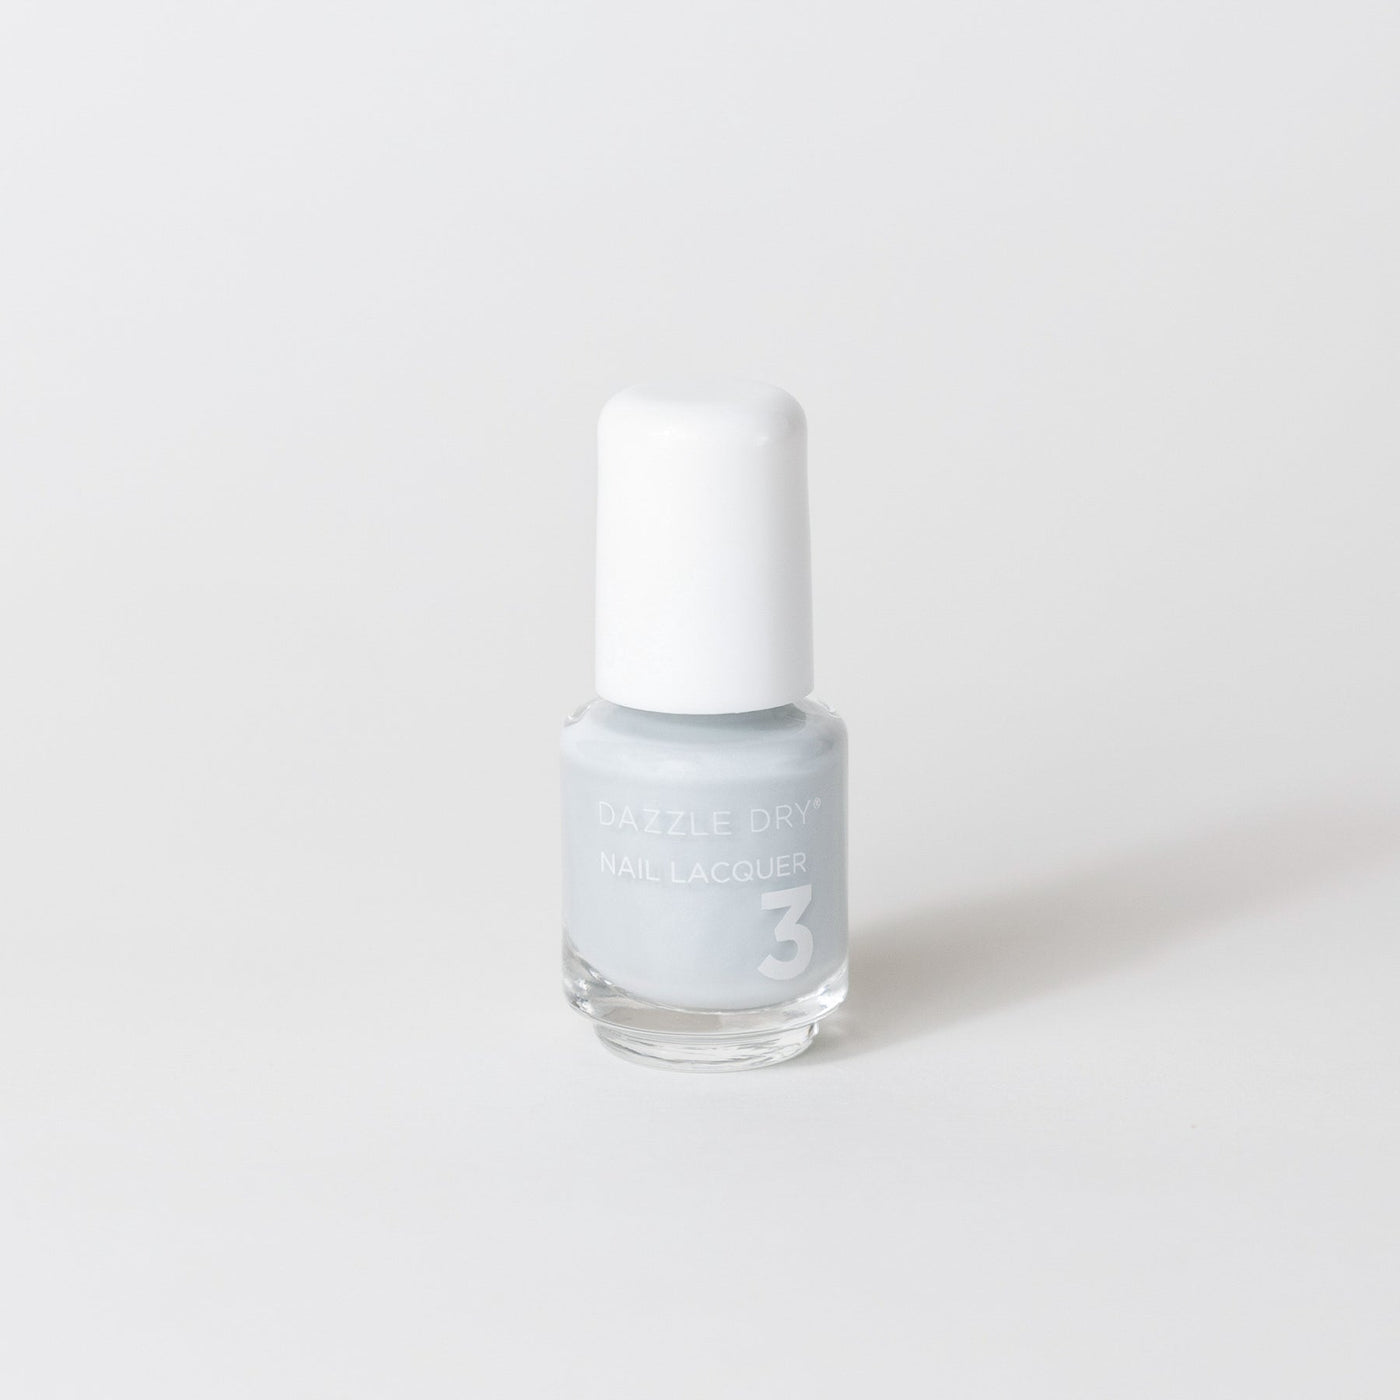 Moonlight Mini - Nail Lacquer by Dazzle Dry